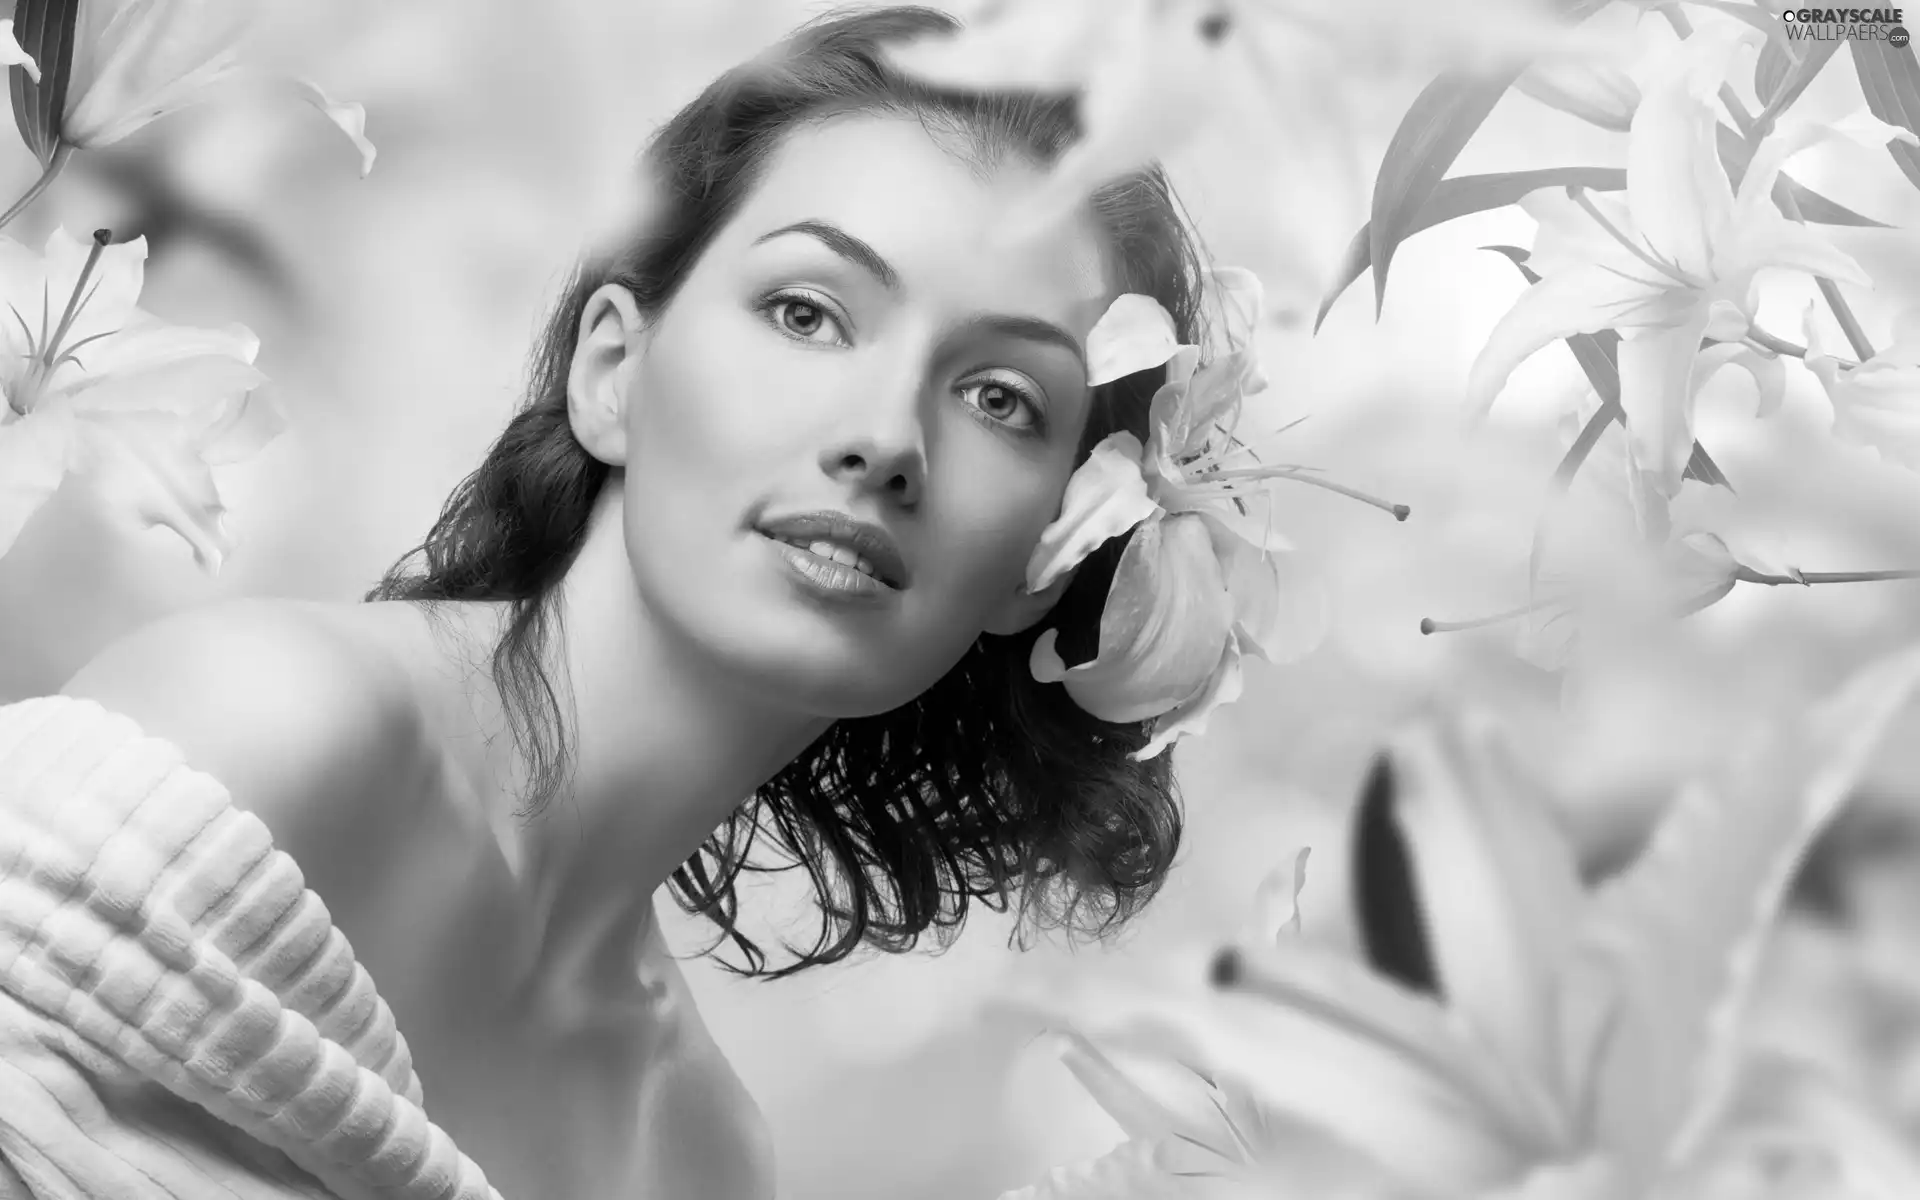 White, lilies, face, make-up, Women